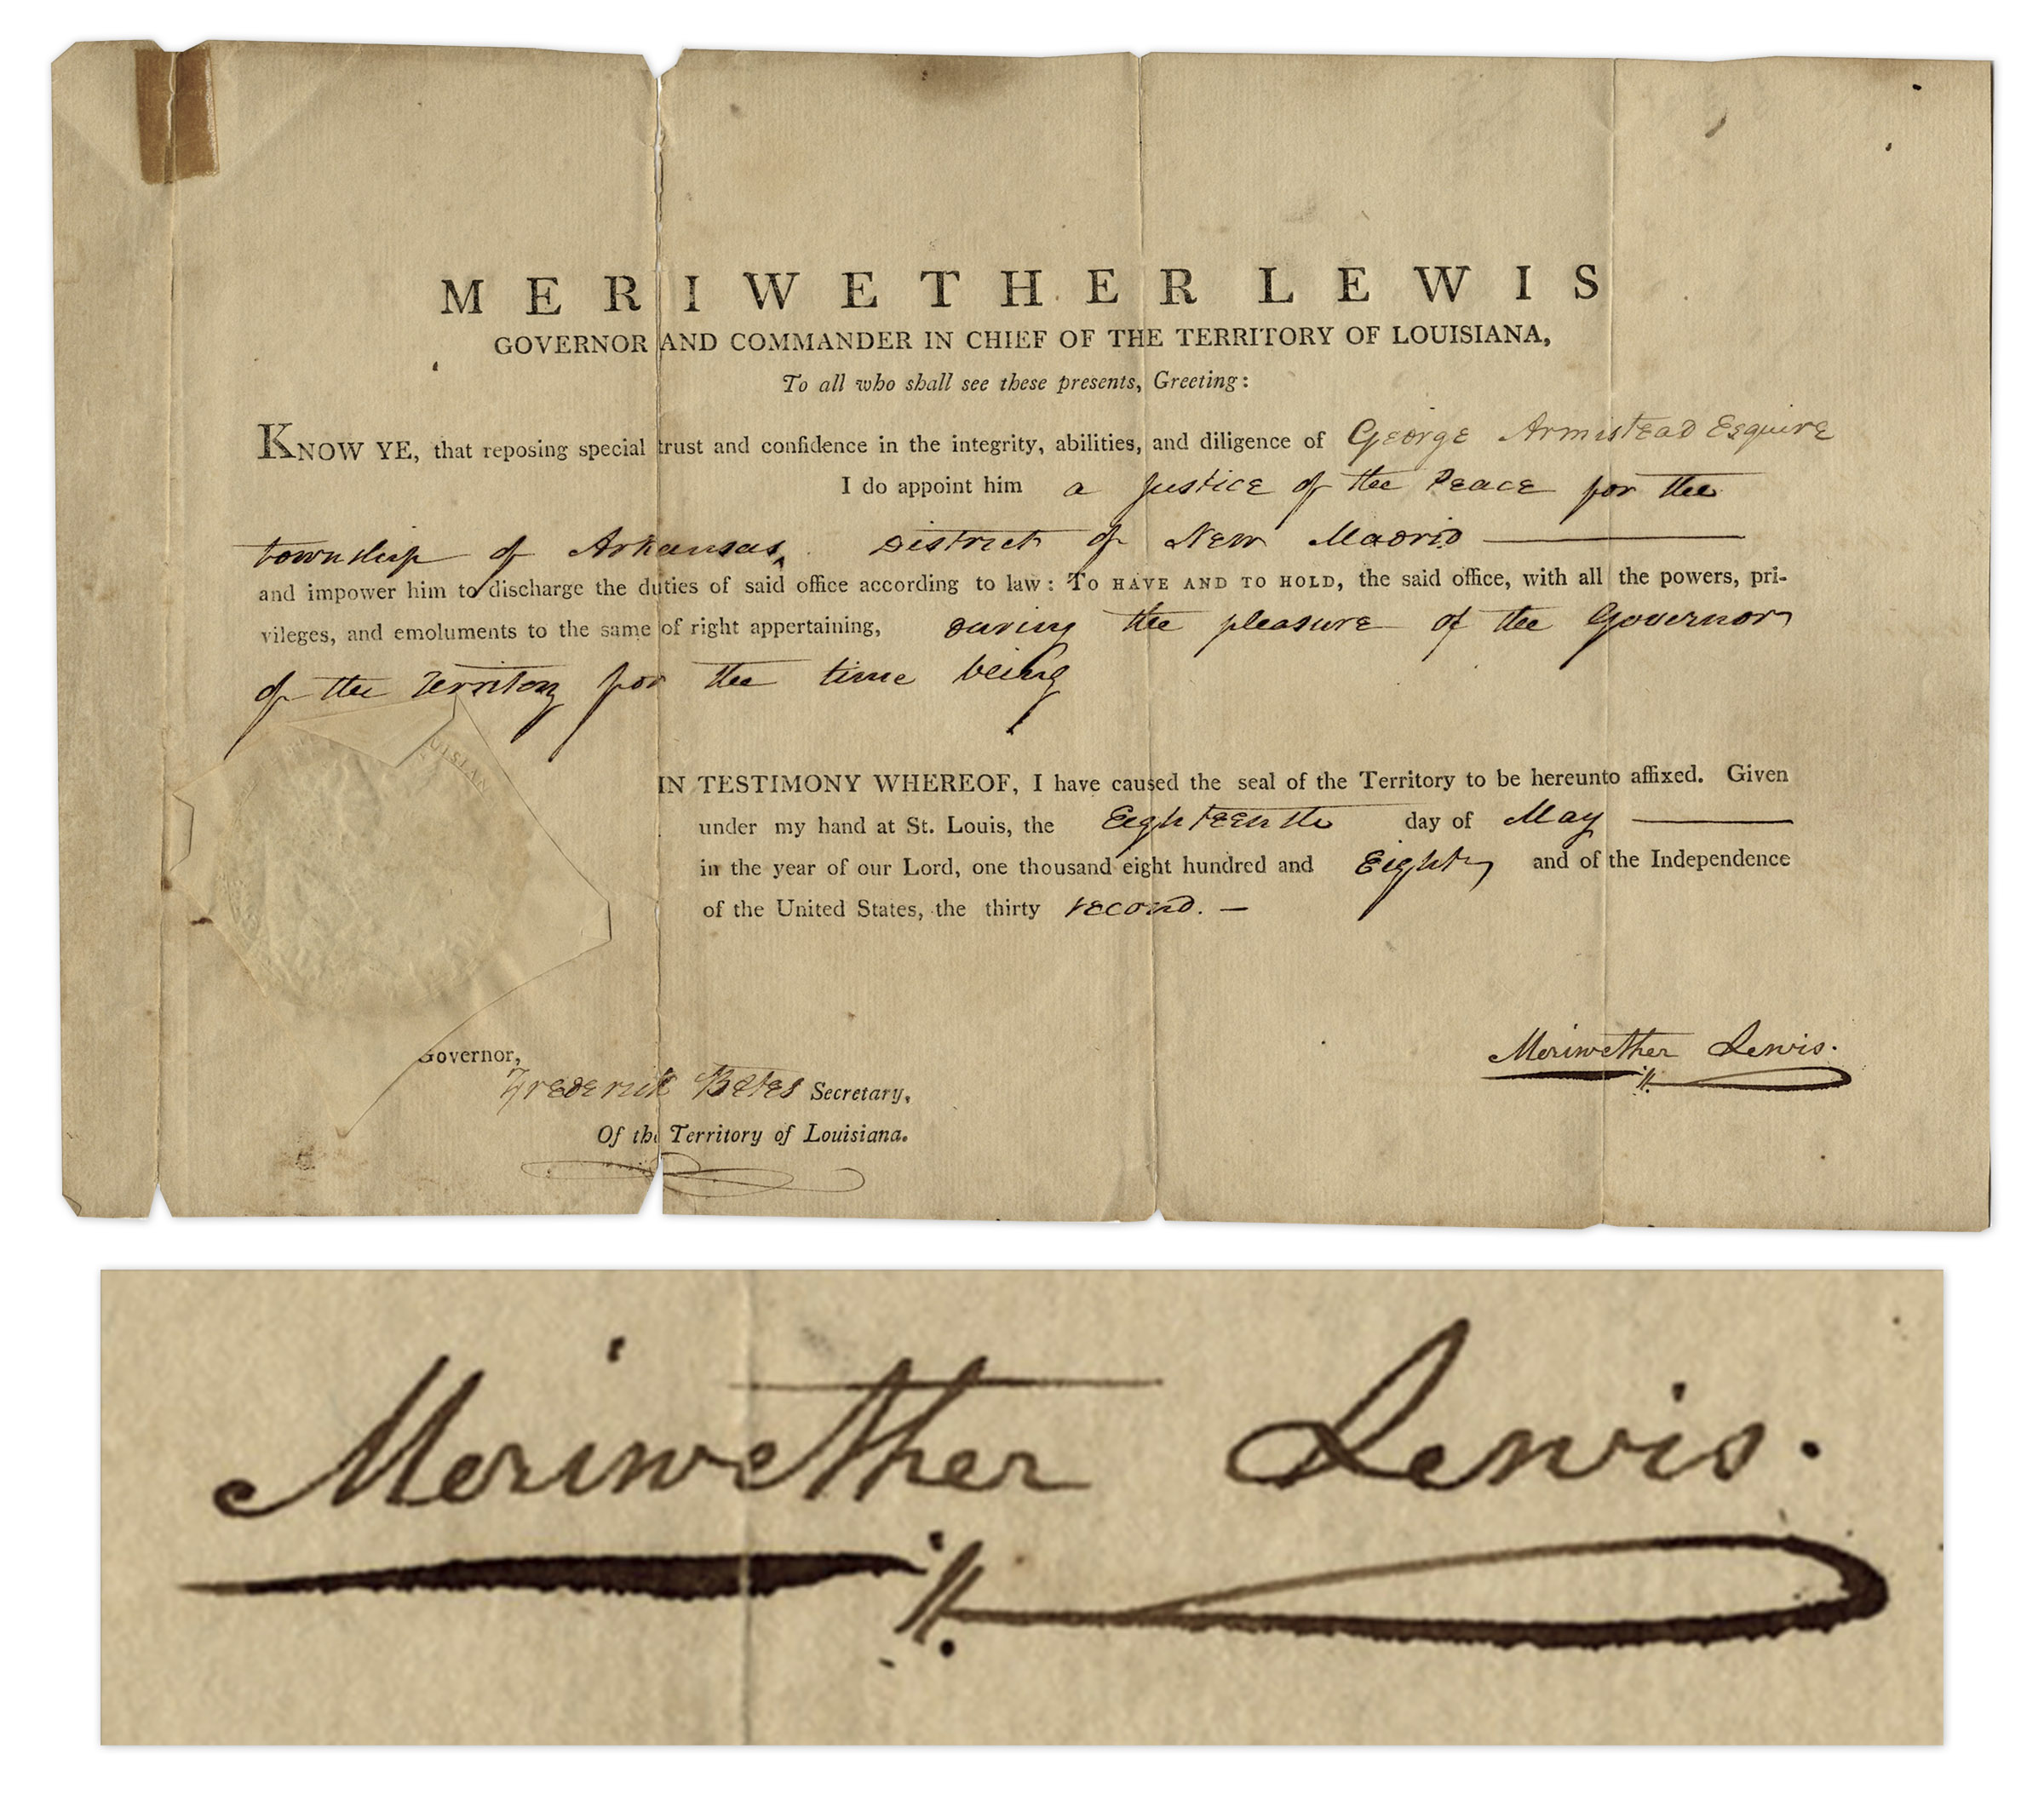 Meriwether Lewis and William Clark History of the Expedition under the Command of Captains Lewis and Clark to the Sources of the Missouri thence across the Rocky Mountains and down the River Columbia to the Pacific